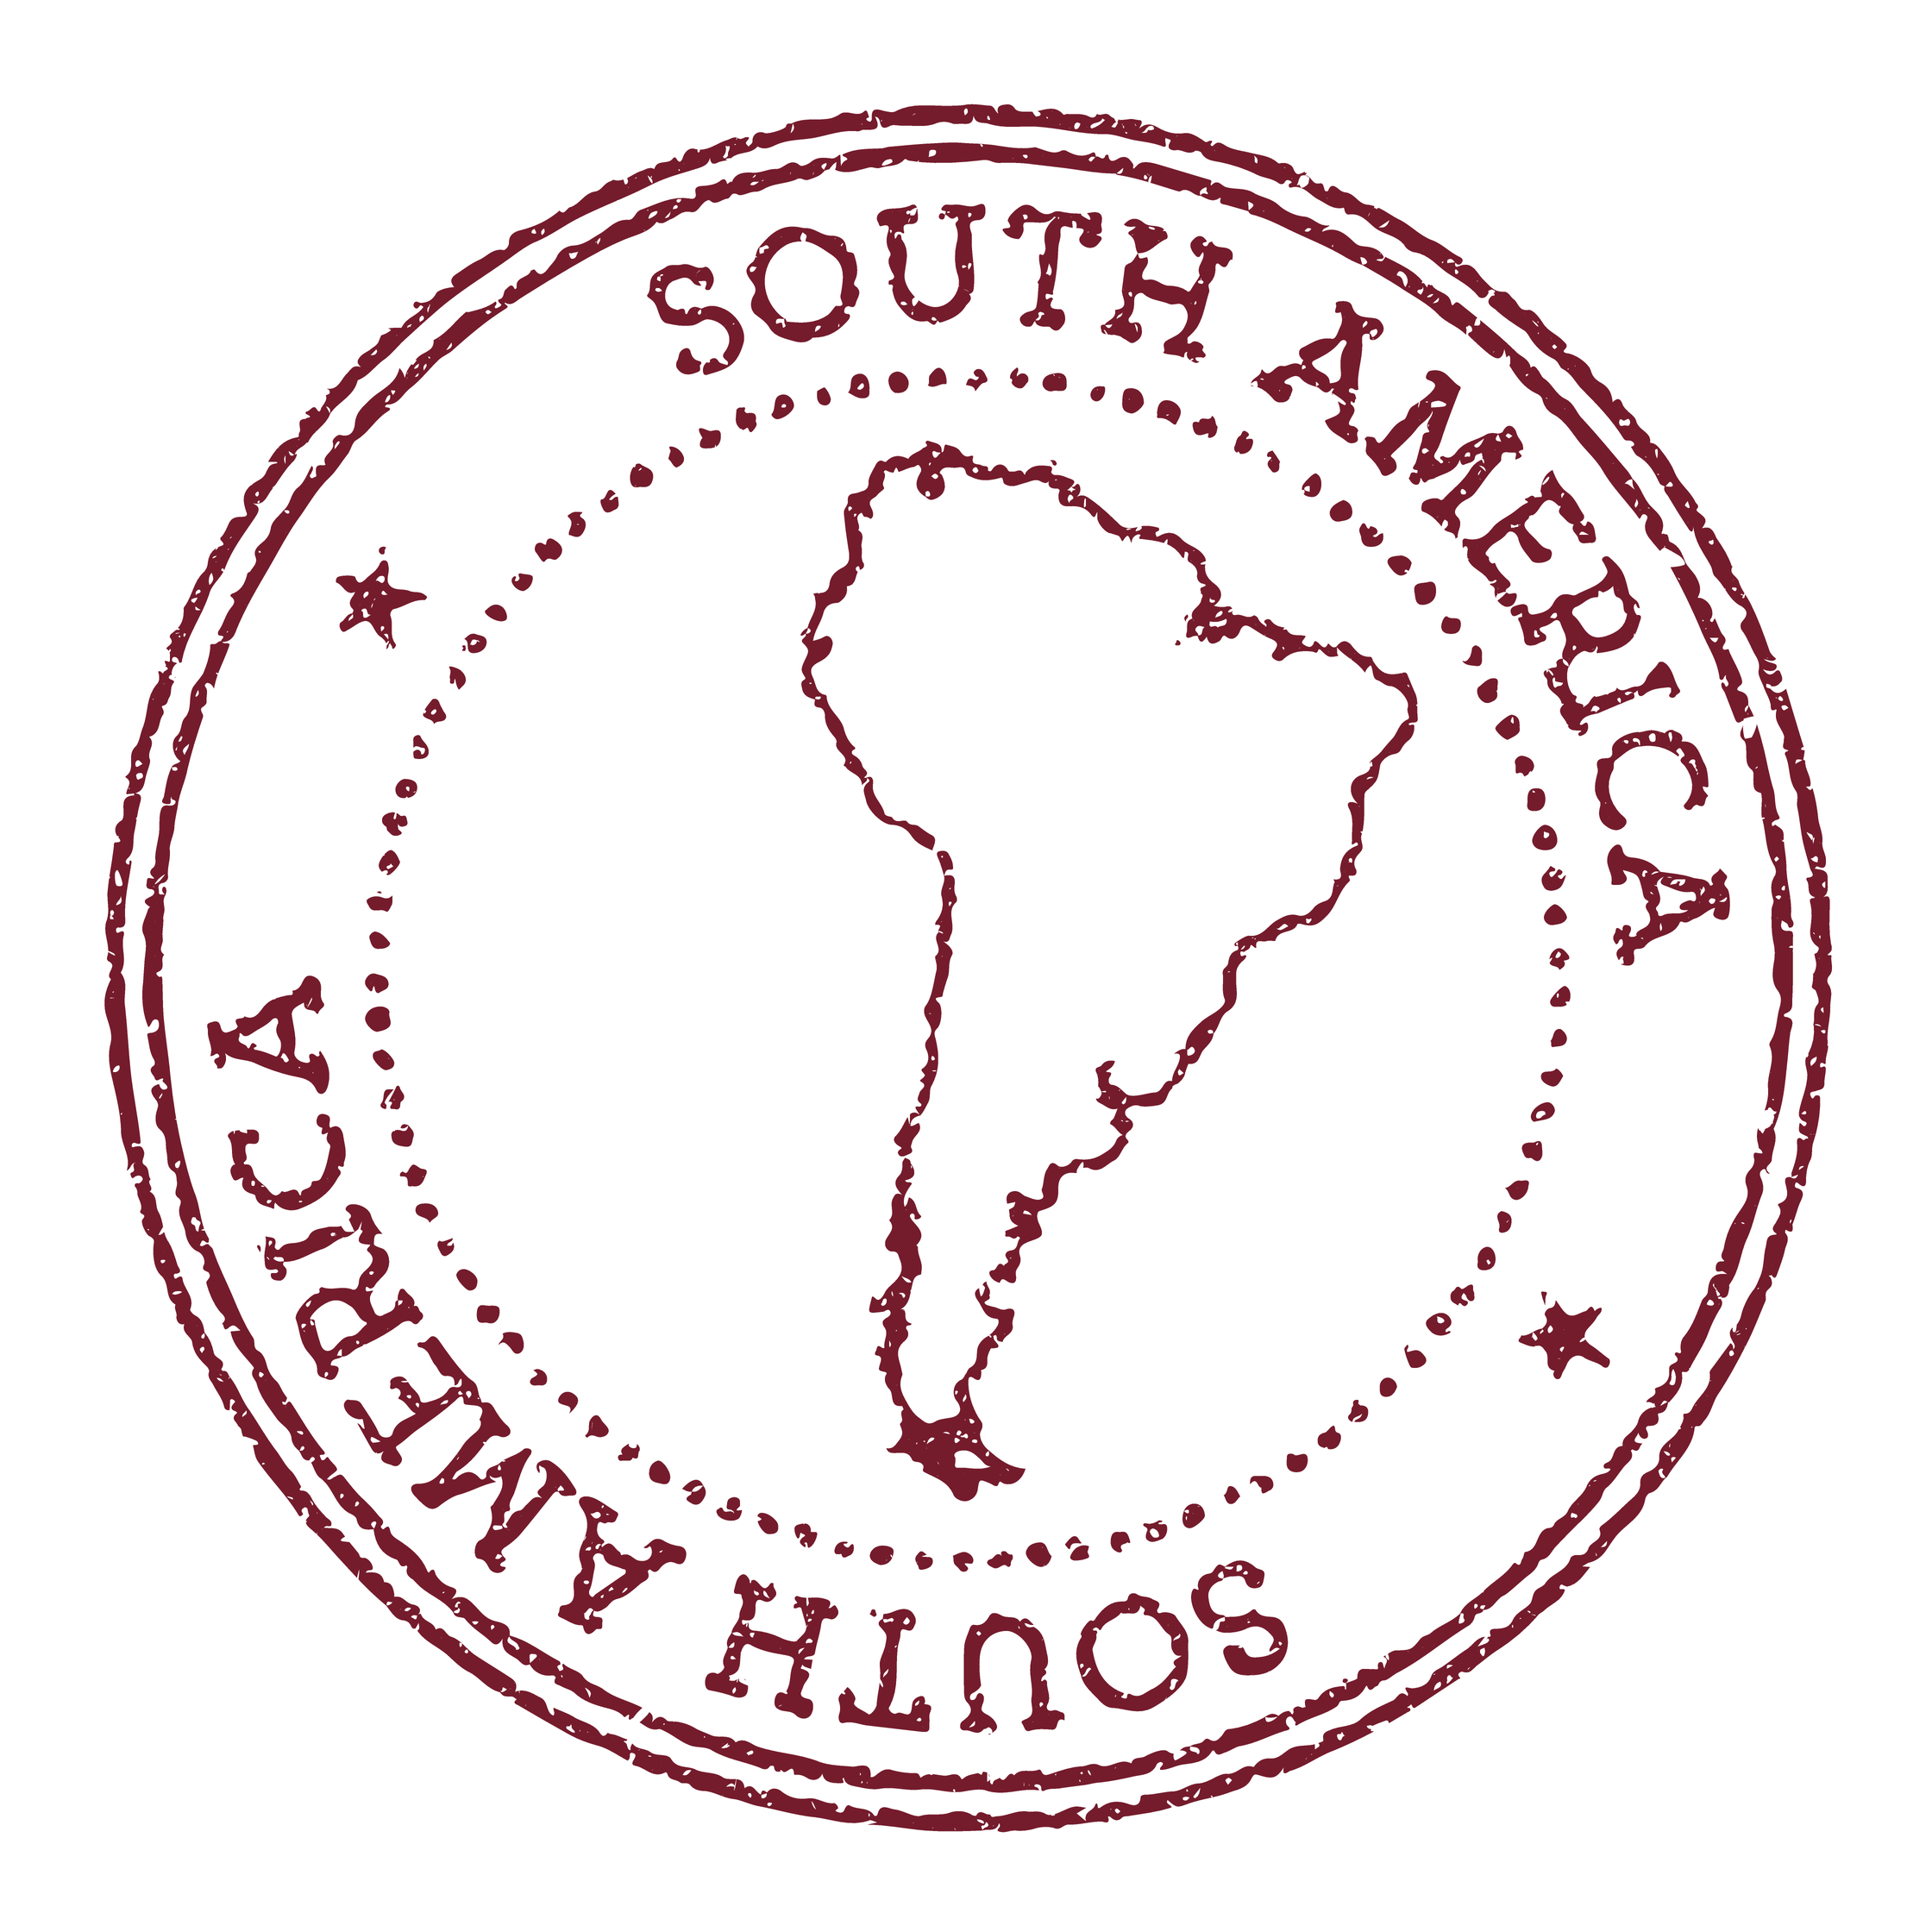 Destinations Round Rubber Postage Stamp, with an outline of the continent in the centre, and the words South America written around the edge of the circle.